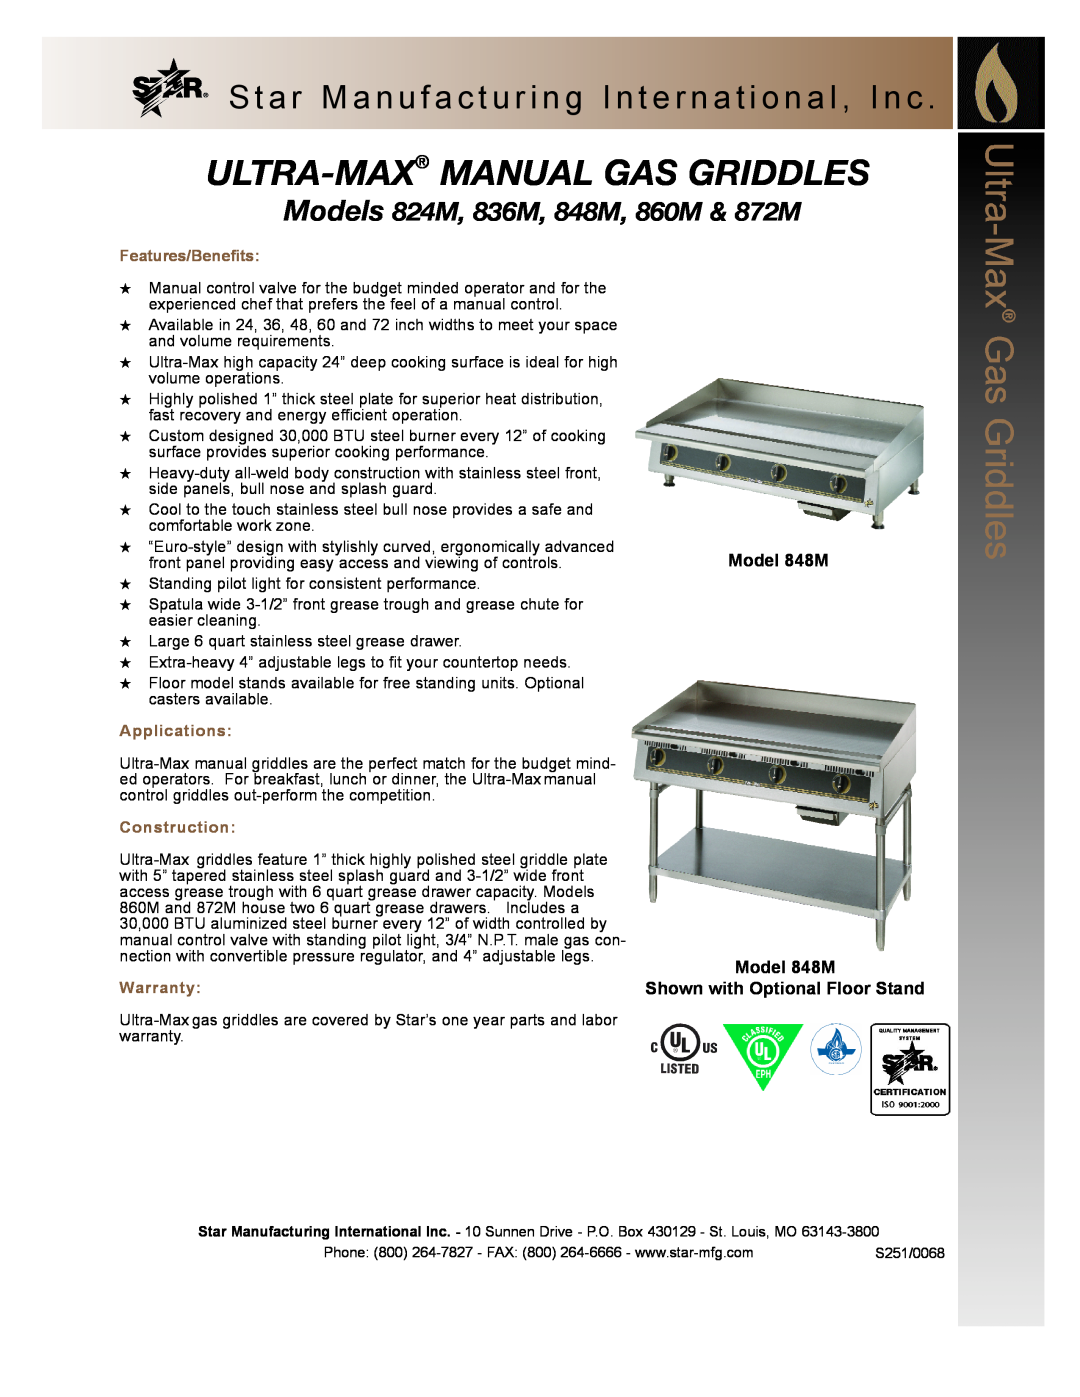 Star Manufacturing warranty Ultra-Max Manual Gas Griddles, Models 824M, 836M, 848M, 860M & 872M, Features/Benefits 